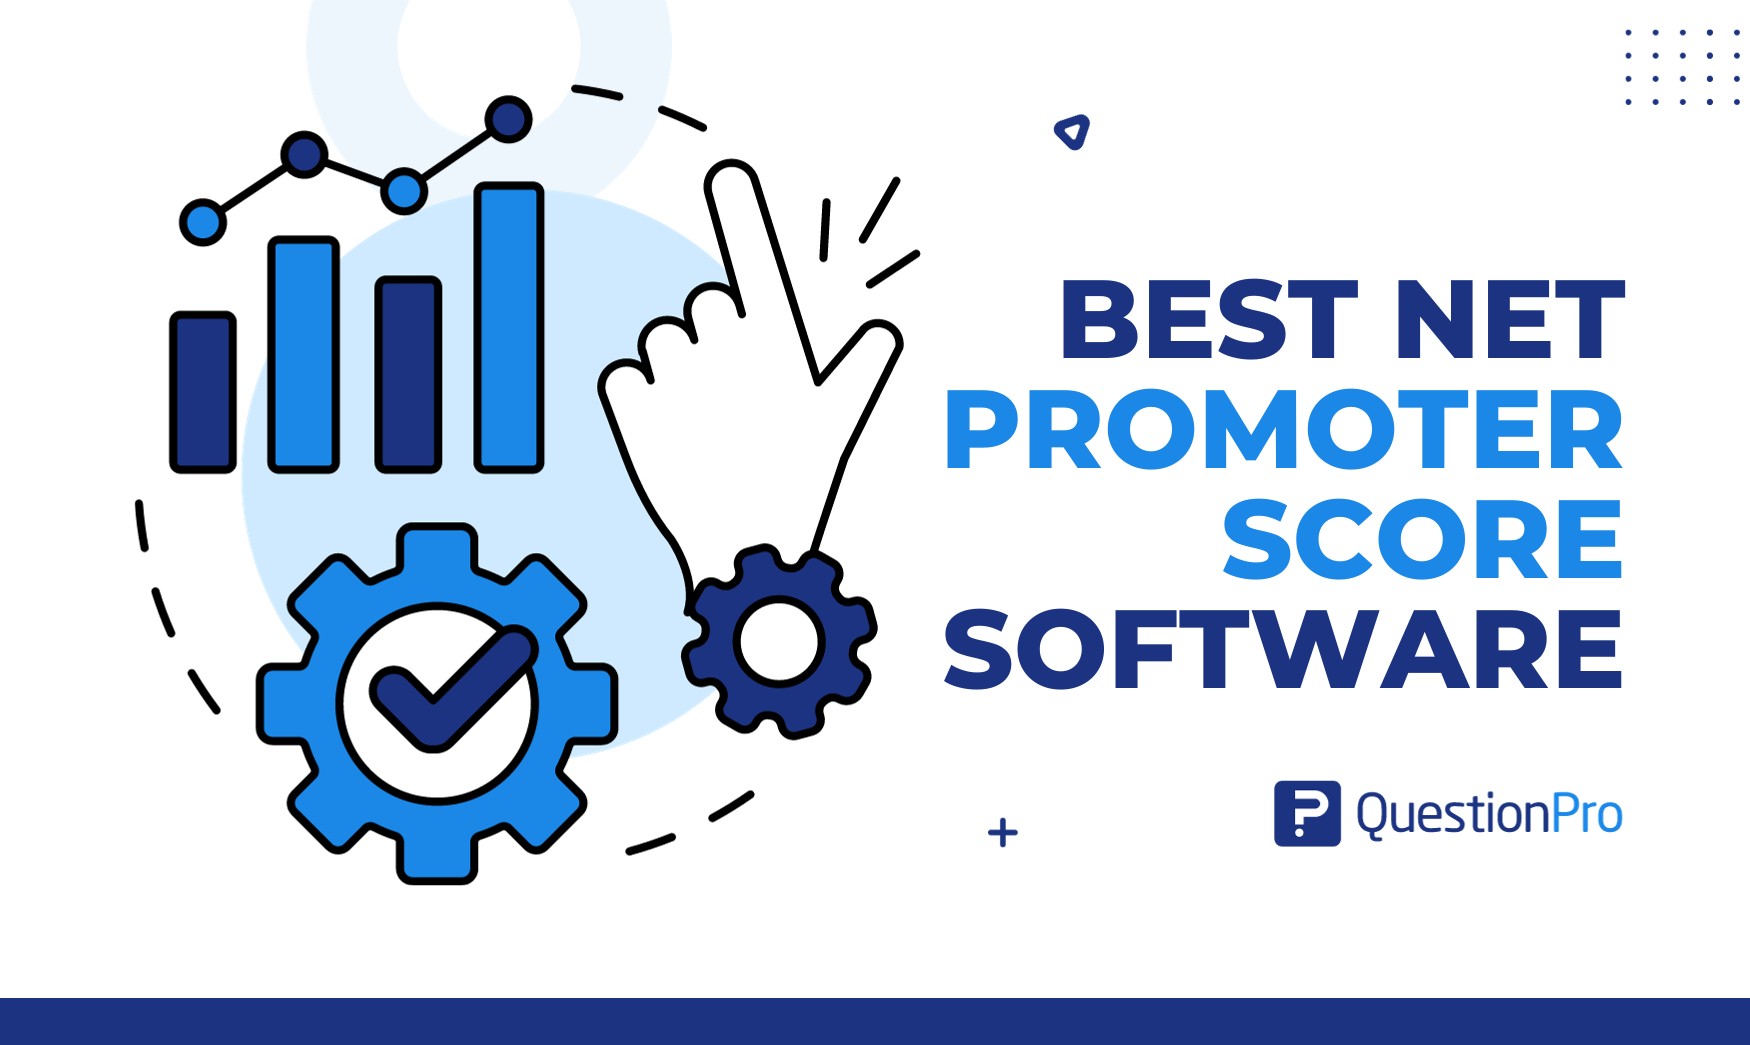 The best Net Promoter Score software allows you to share real-time feedback to improve customer experience. Let's explore them.